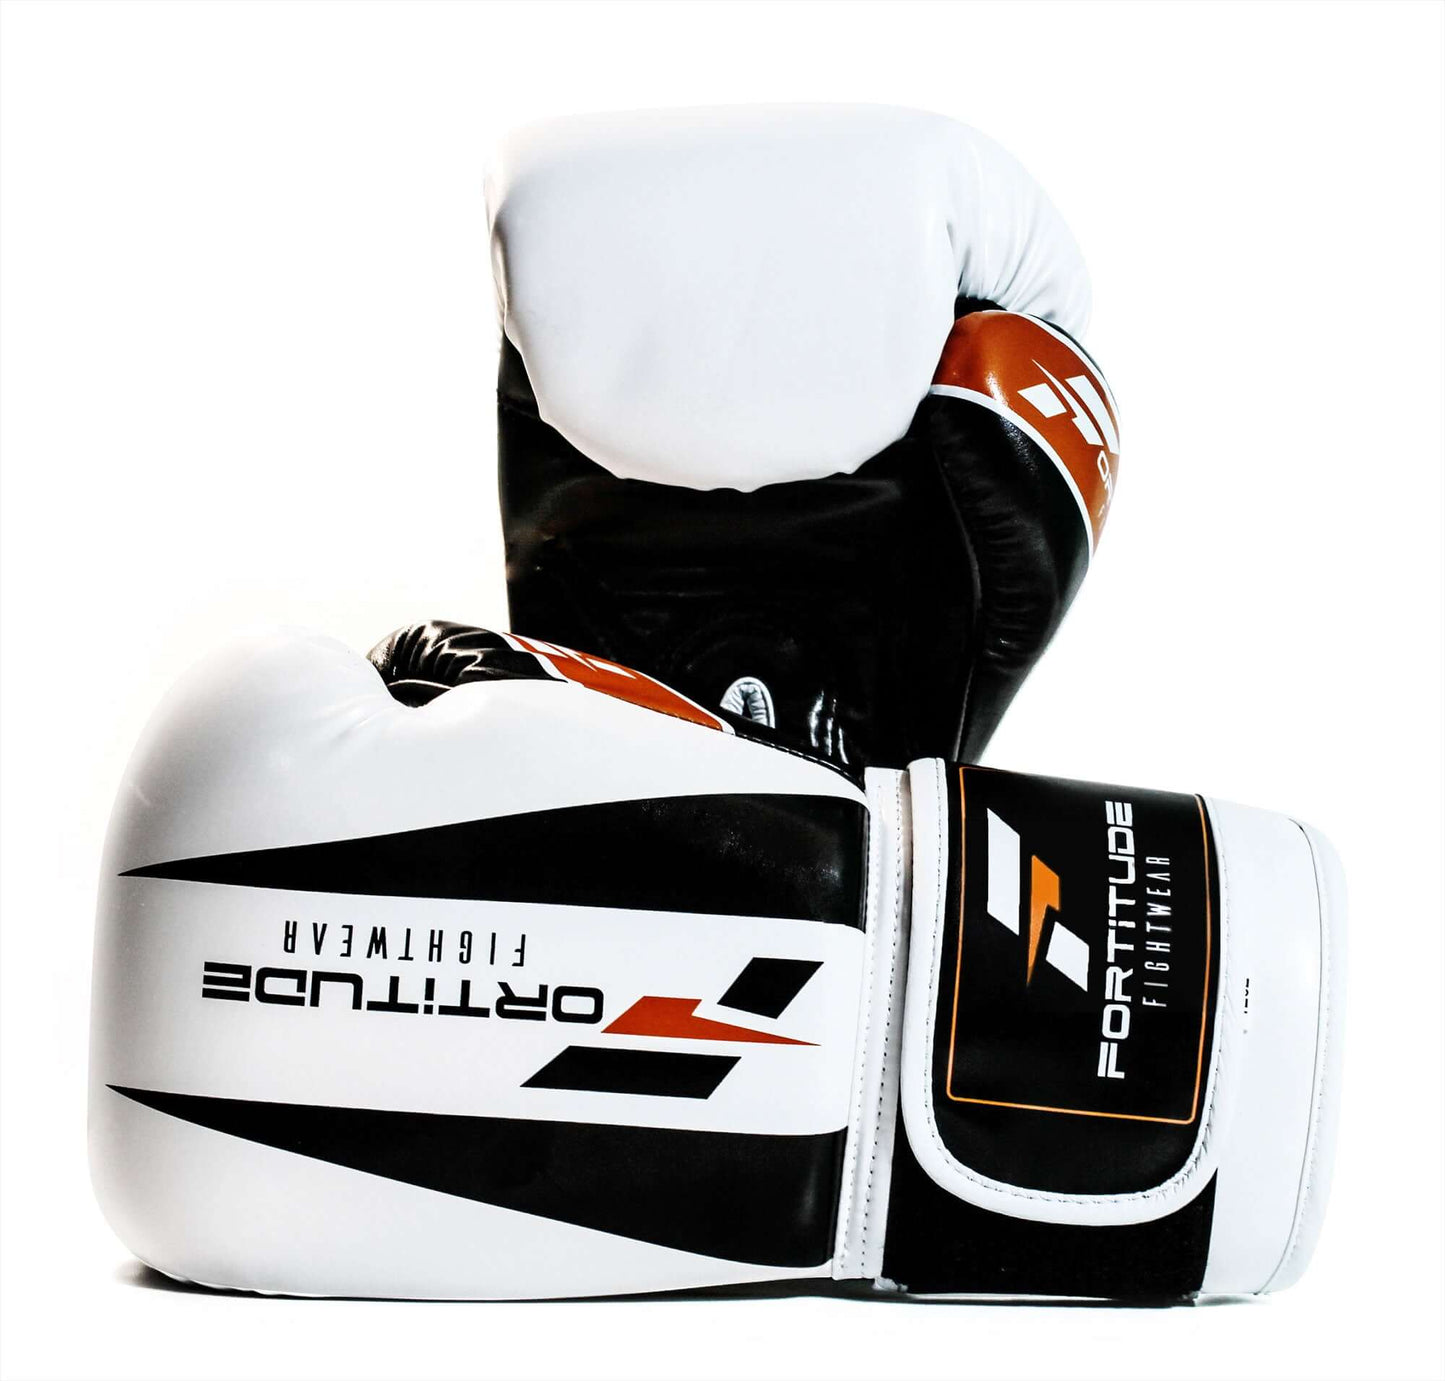 Fortitude Fightwear Leather Boxing Gloves